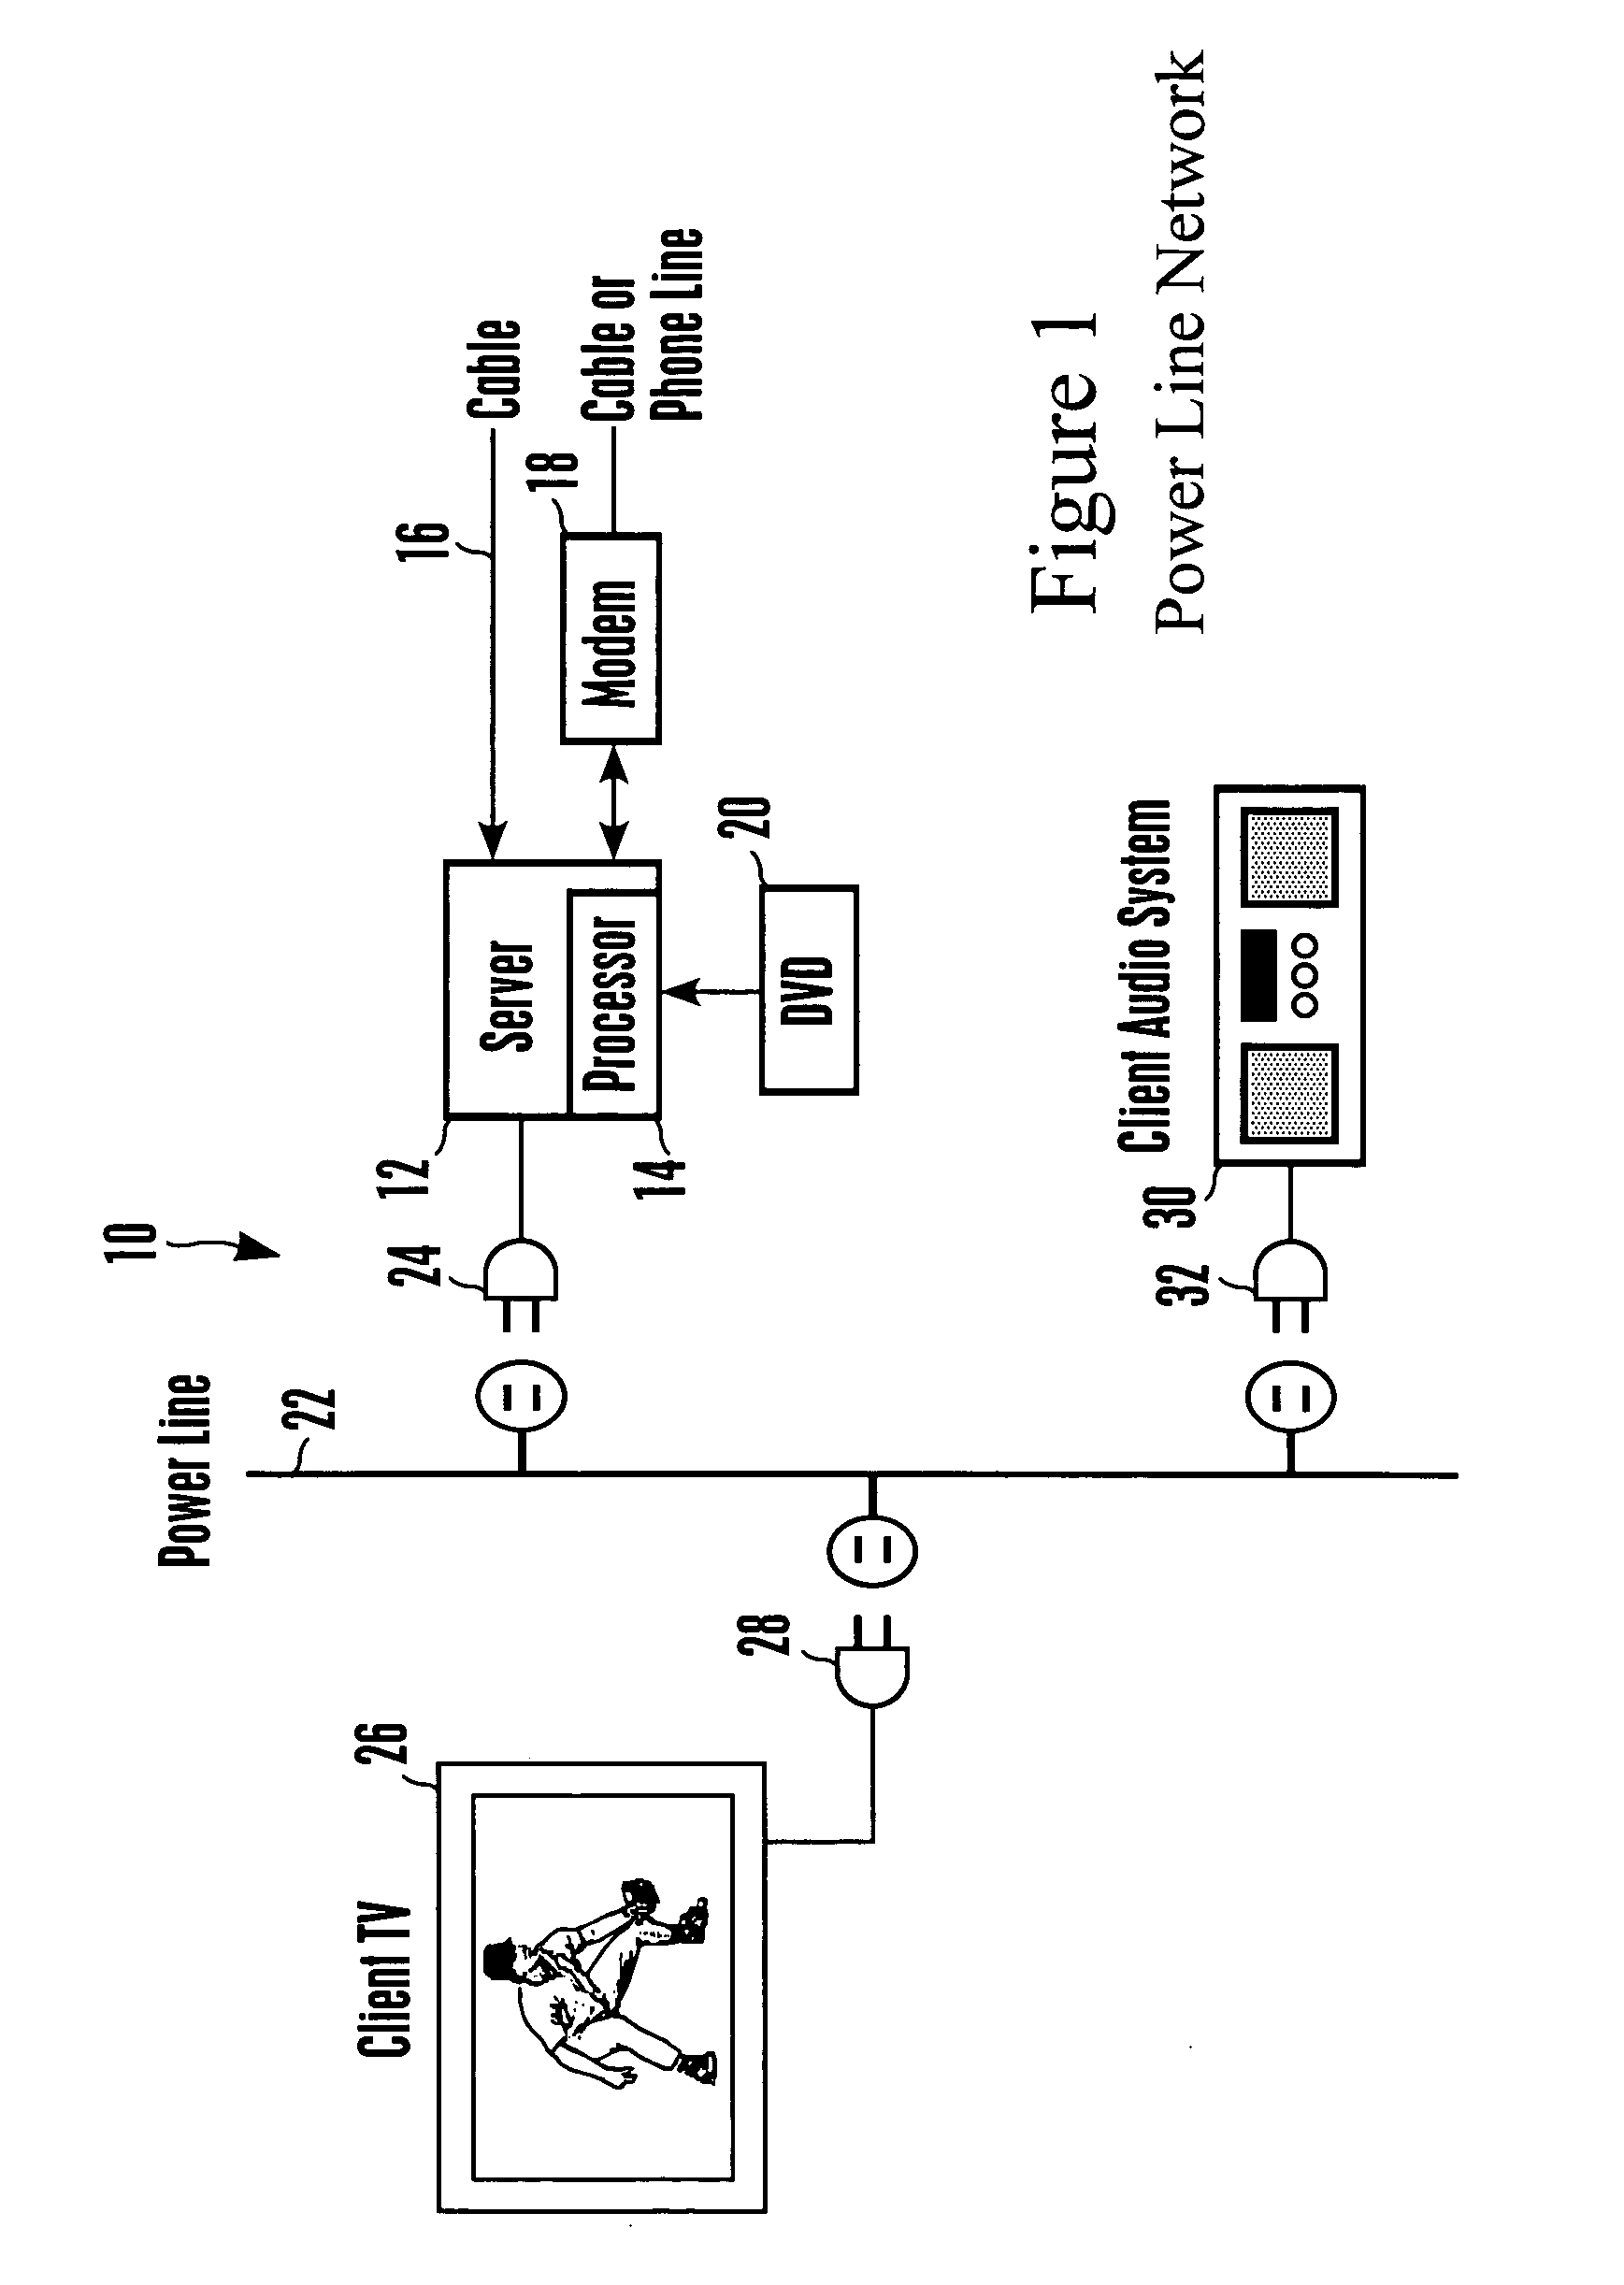 Plural interfaces in home network with first component having a first host bus width and second component having second bus width